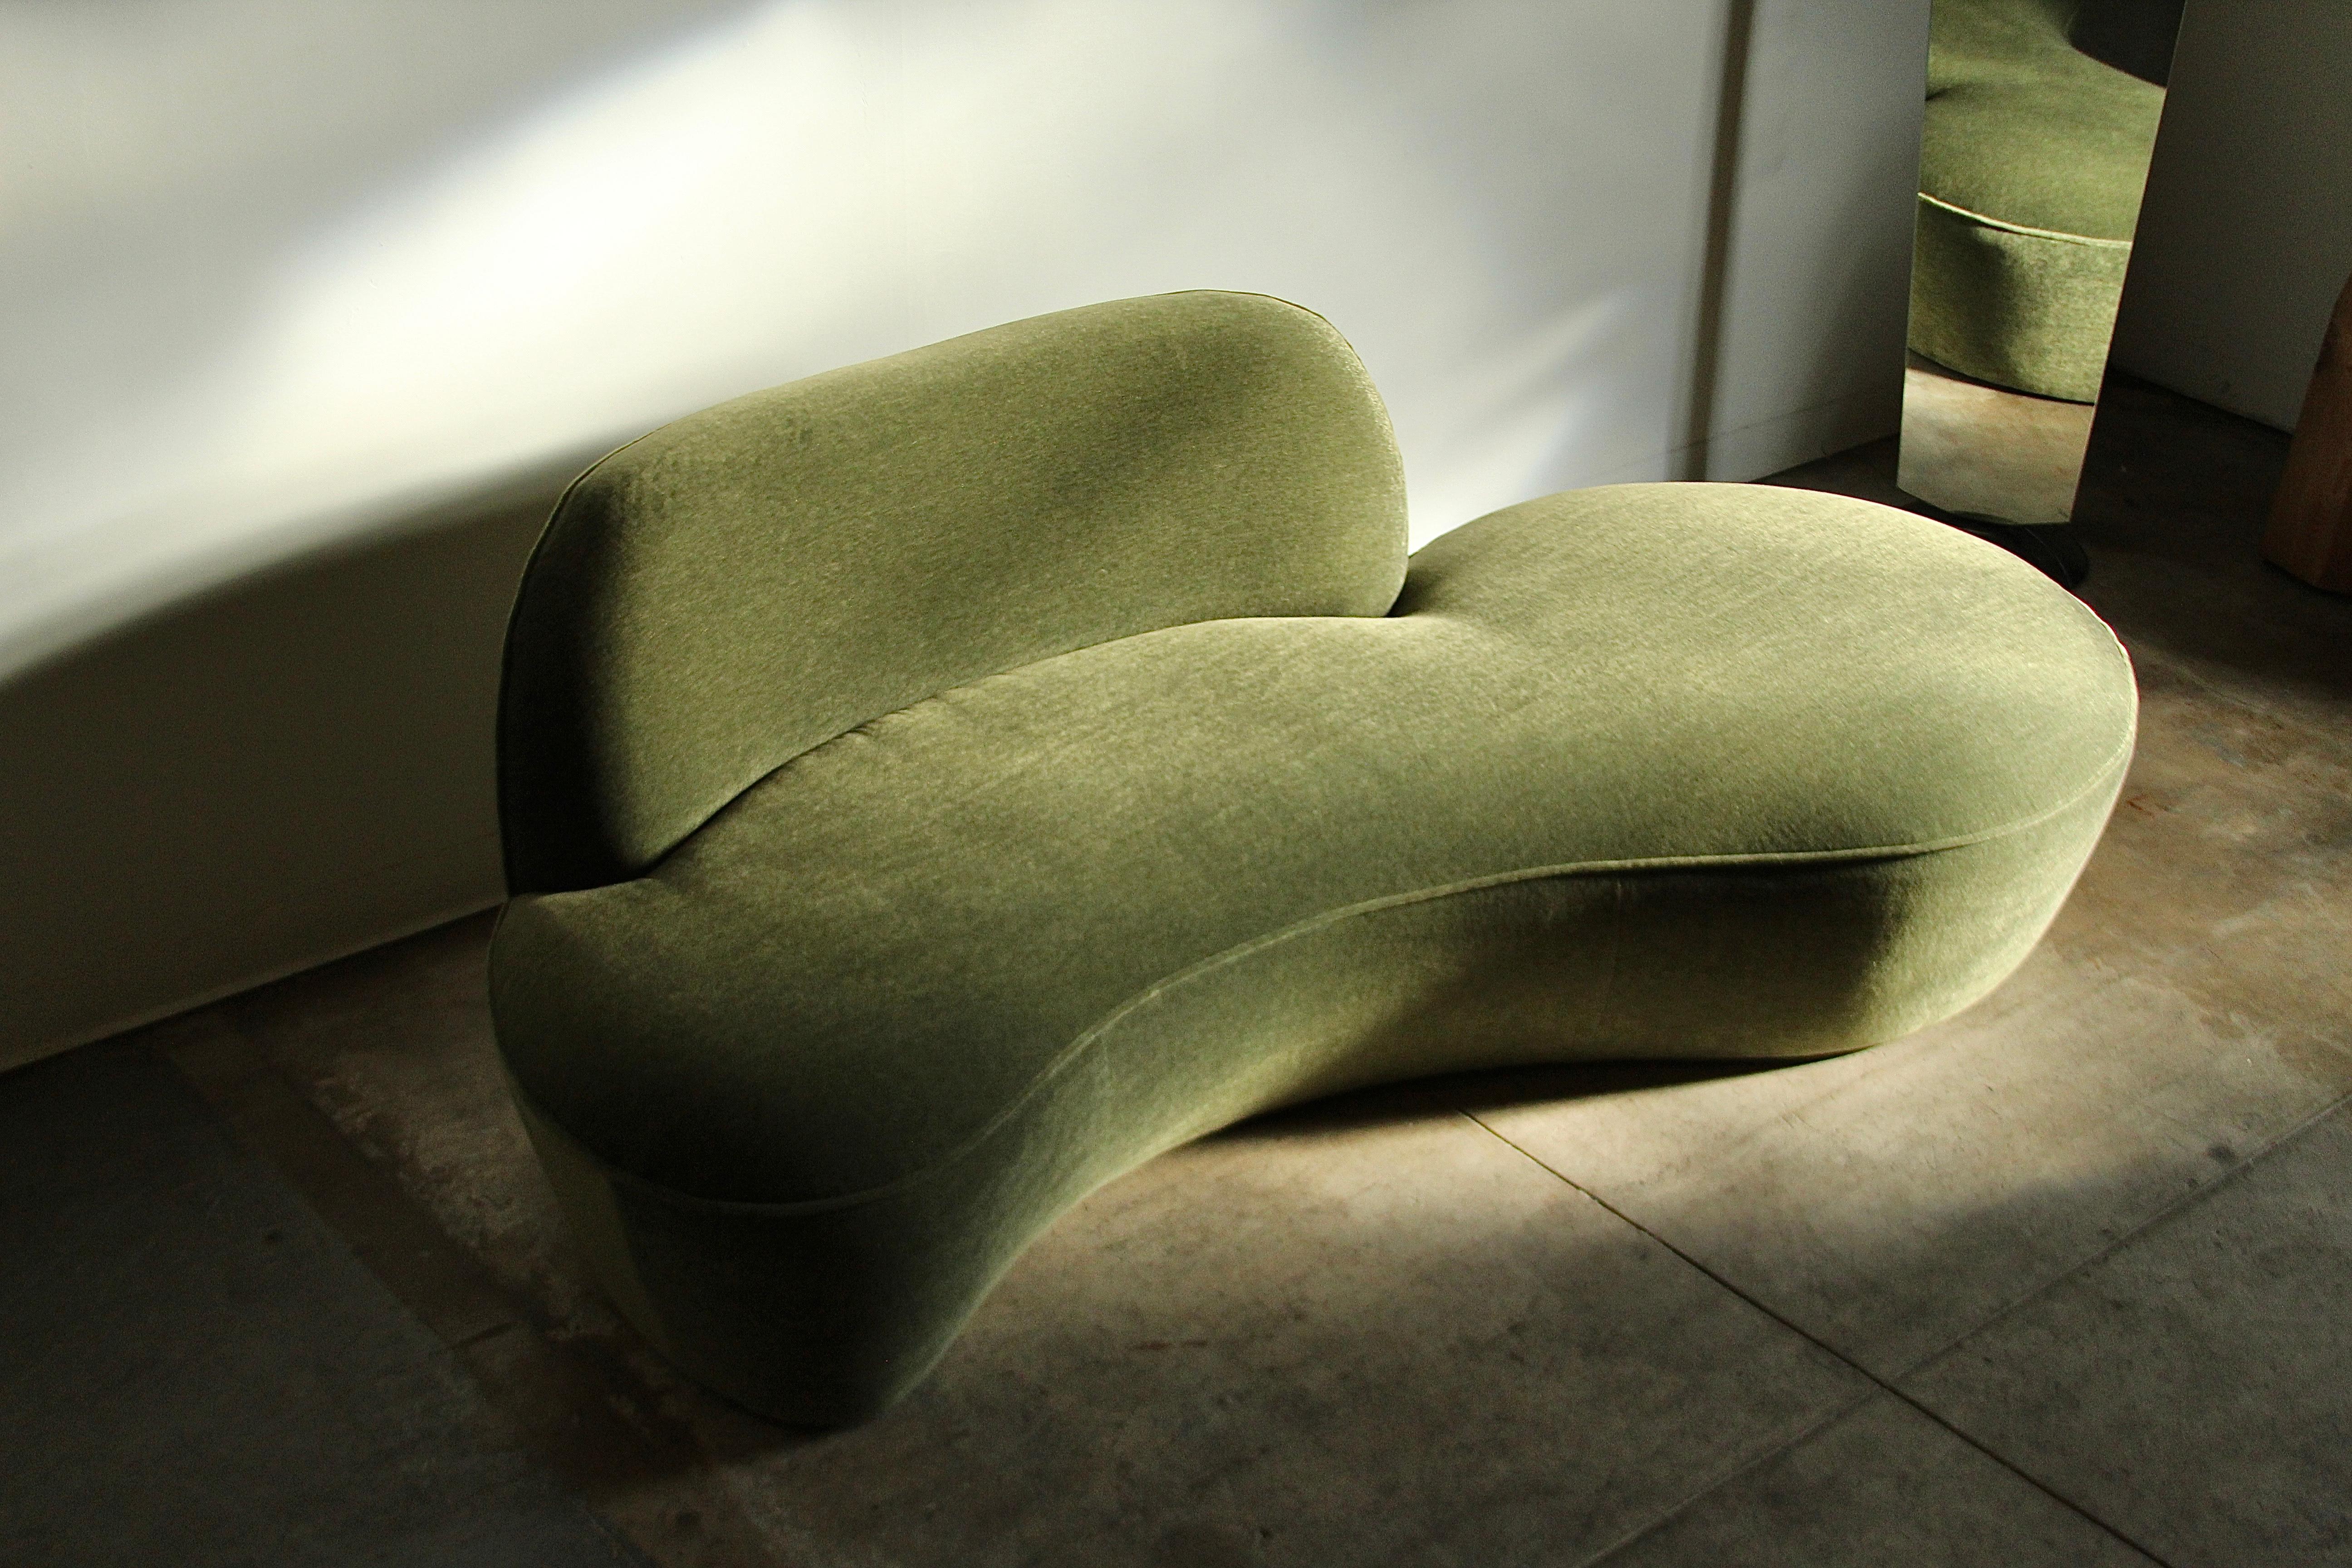 A stunning serpentine sofa by Vladimir Kagan for American Leather, circa 2000s. This piece has been masterfully reupholstered in a sumptuous moss green mohair. It will elevate any interior space with is curvaceous form and warm, inviting upholstery.